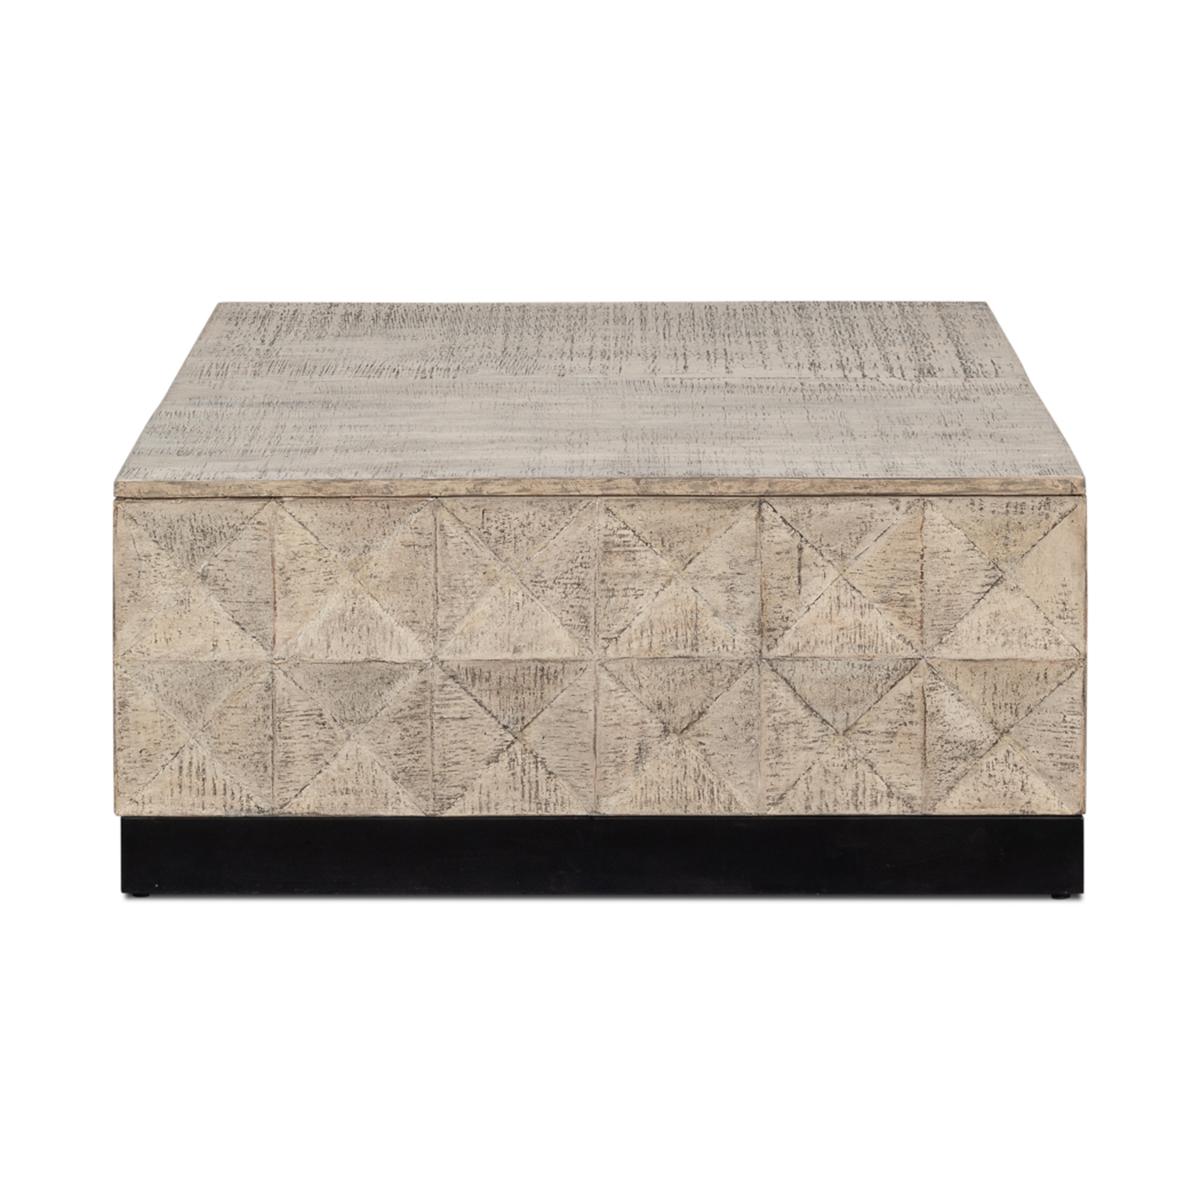 Modern Rustic square coffee table in a grey eclectic finish on mango wood, with geometric patterns to the sides and raised on an iron plinth base.

Dimensions: 36